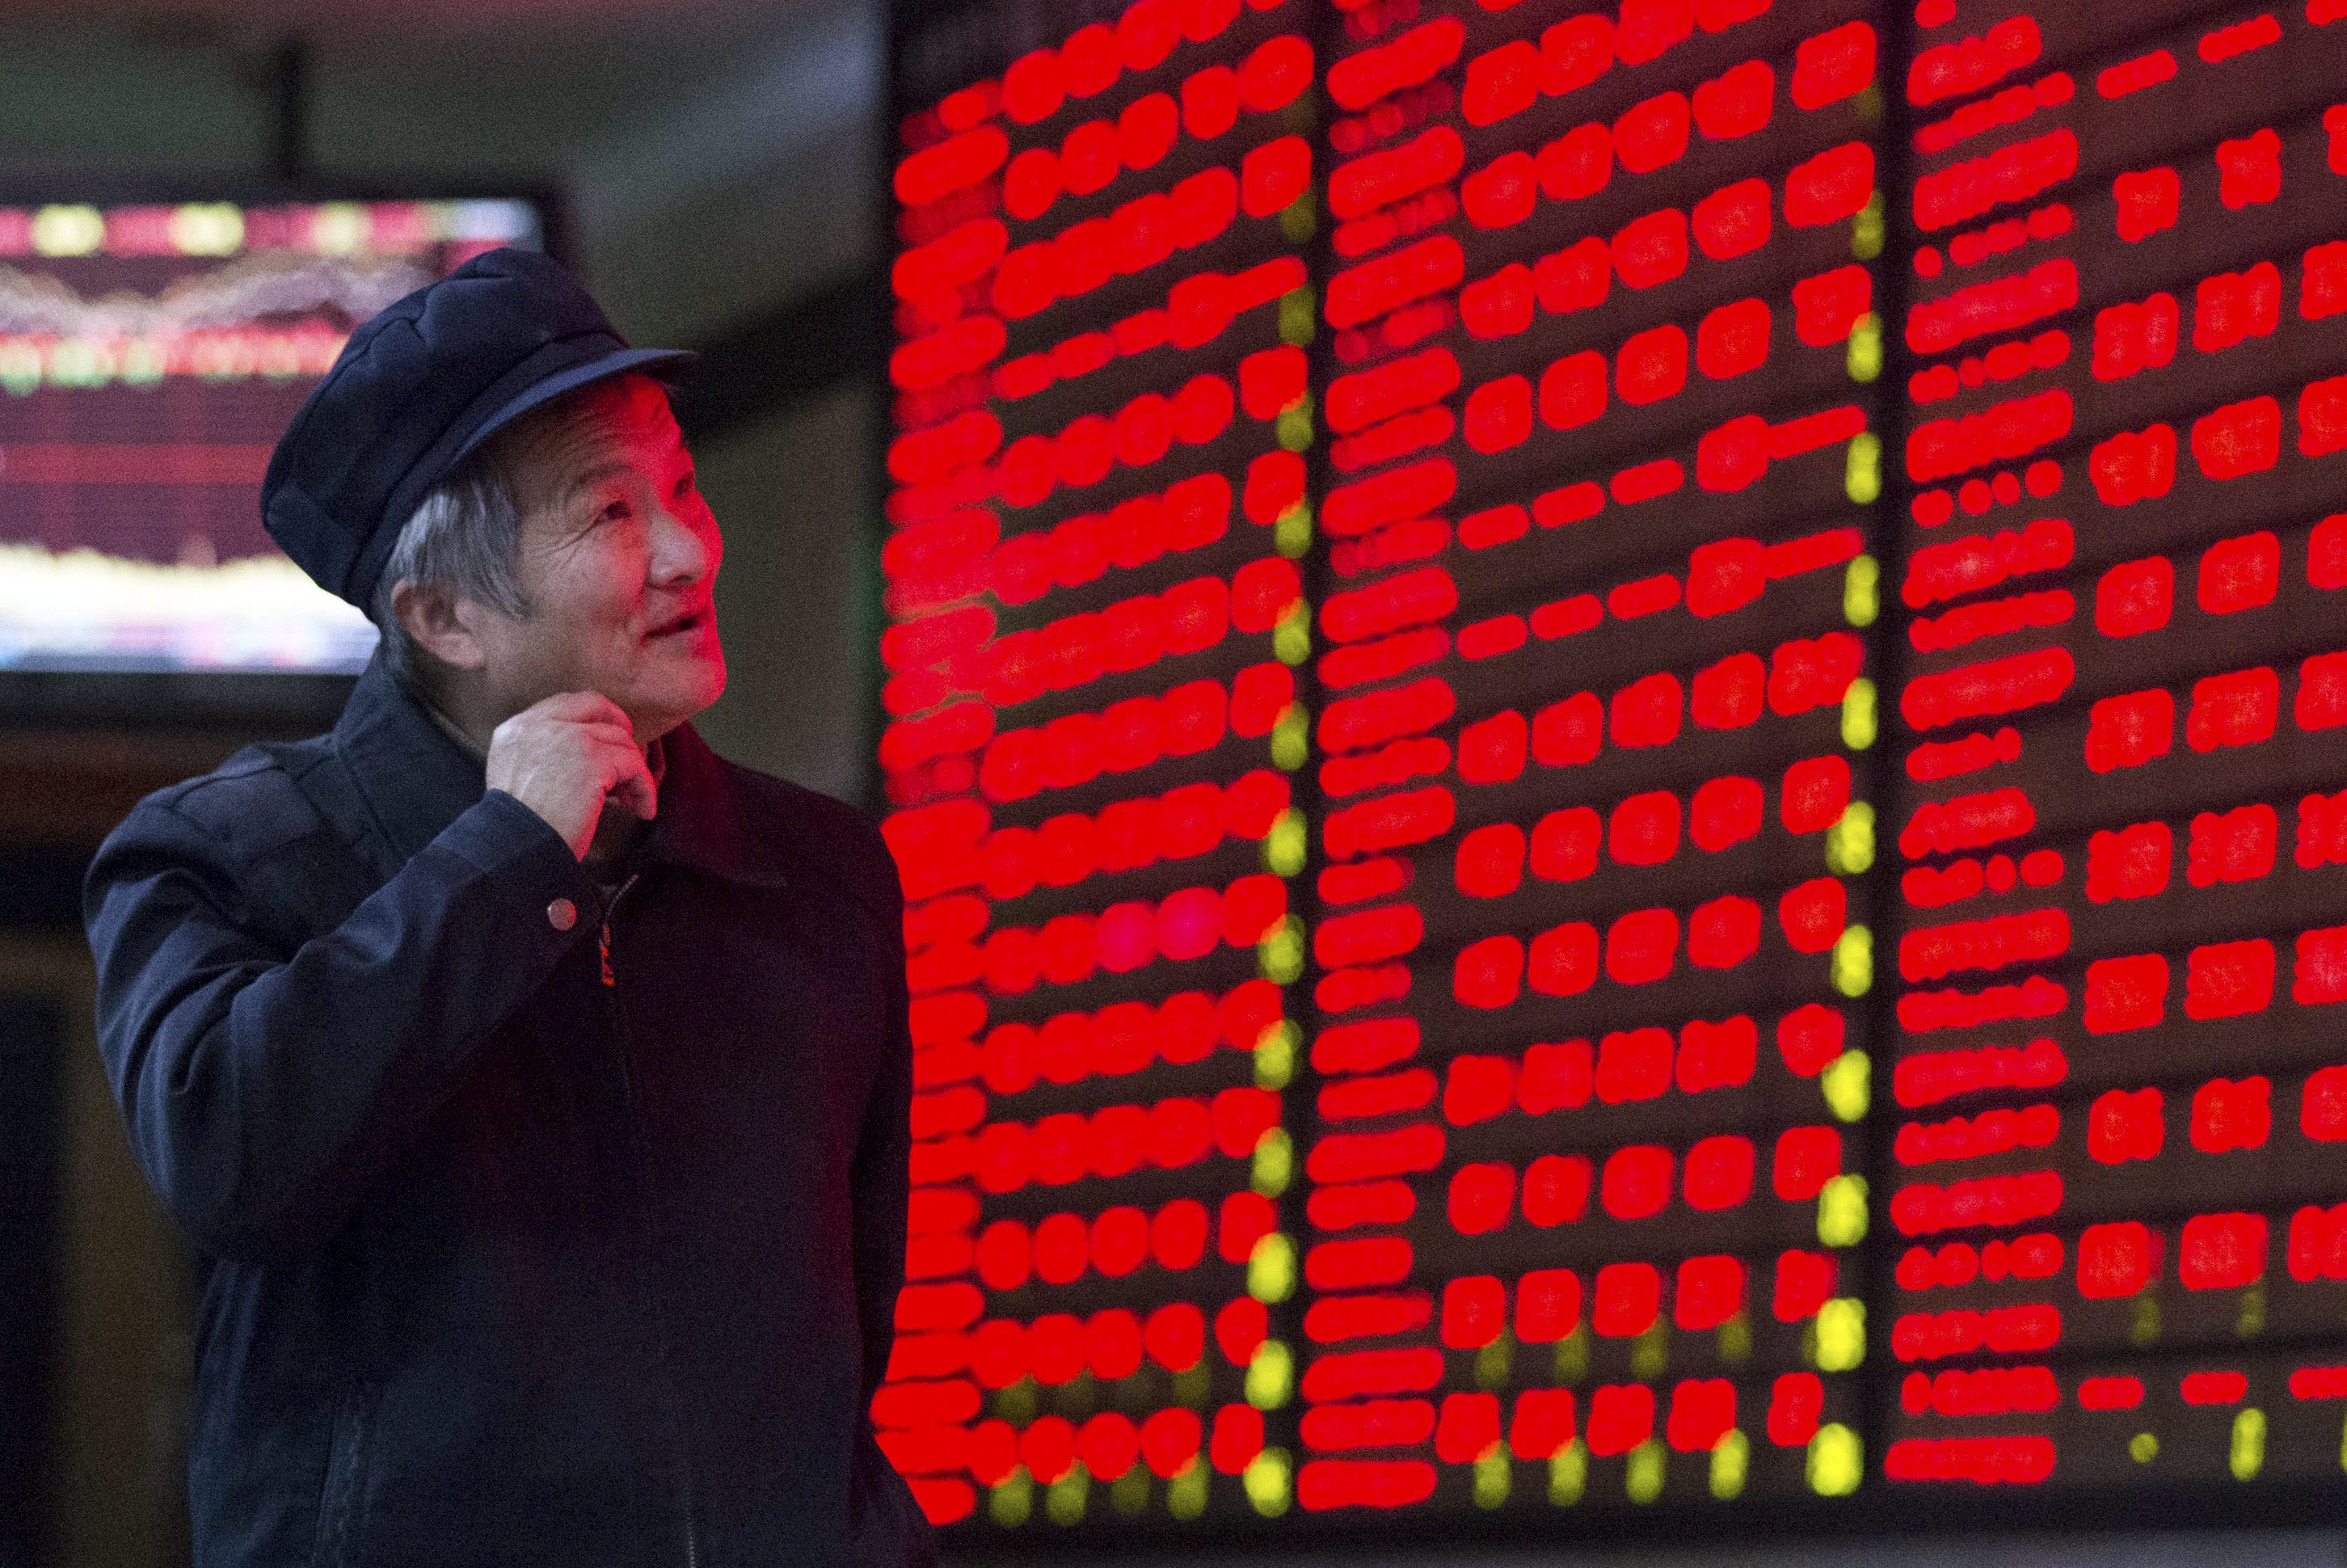 An investor looks at an electronic board showing stock information, filled with red colour indicating rising prices, at a brokerage house in Nanjing, Jiangsu province, China, December 3, 2015. REUTERS/China Daily CHINA OUT. NO COMMERCIAL OR EDITORIAL SALES IN CHINA